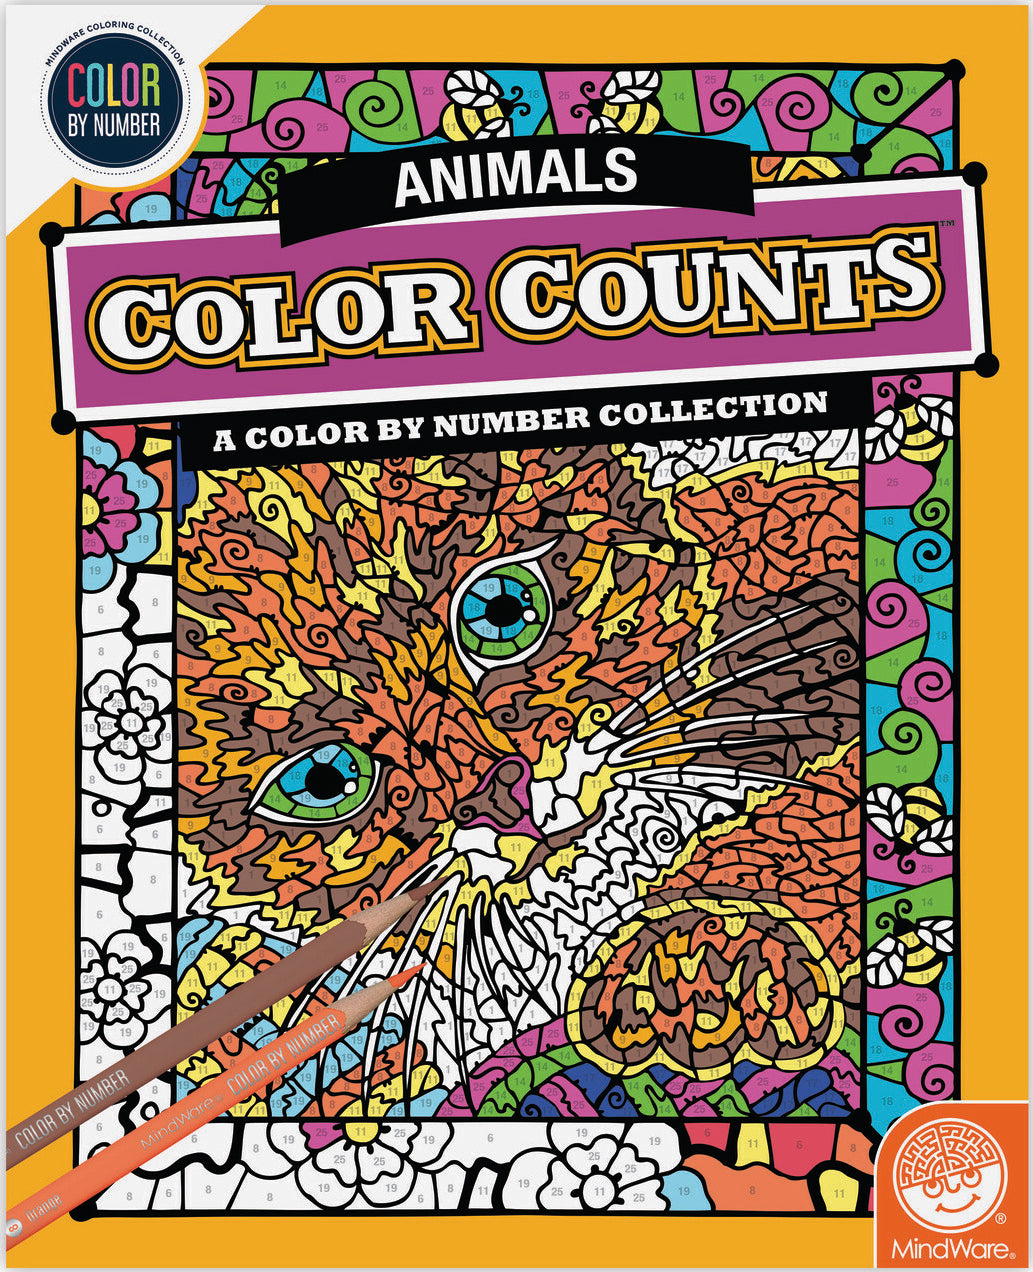 Cbn: Color Counts Animals